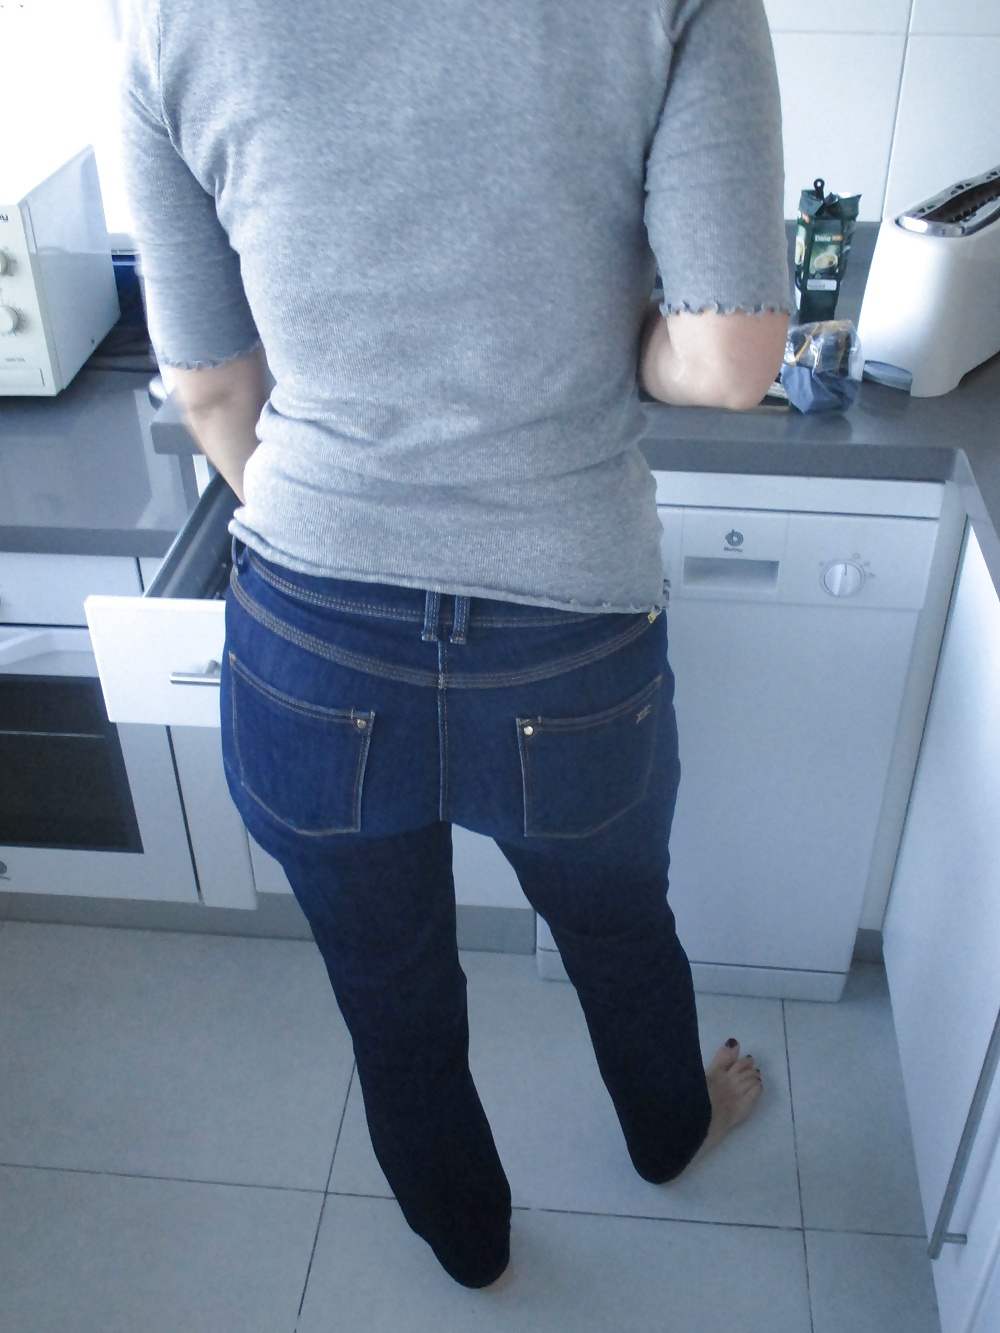 Big firm mature ass in jeans #22593268